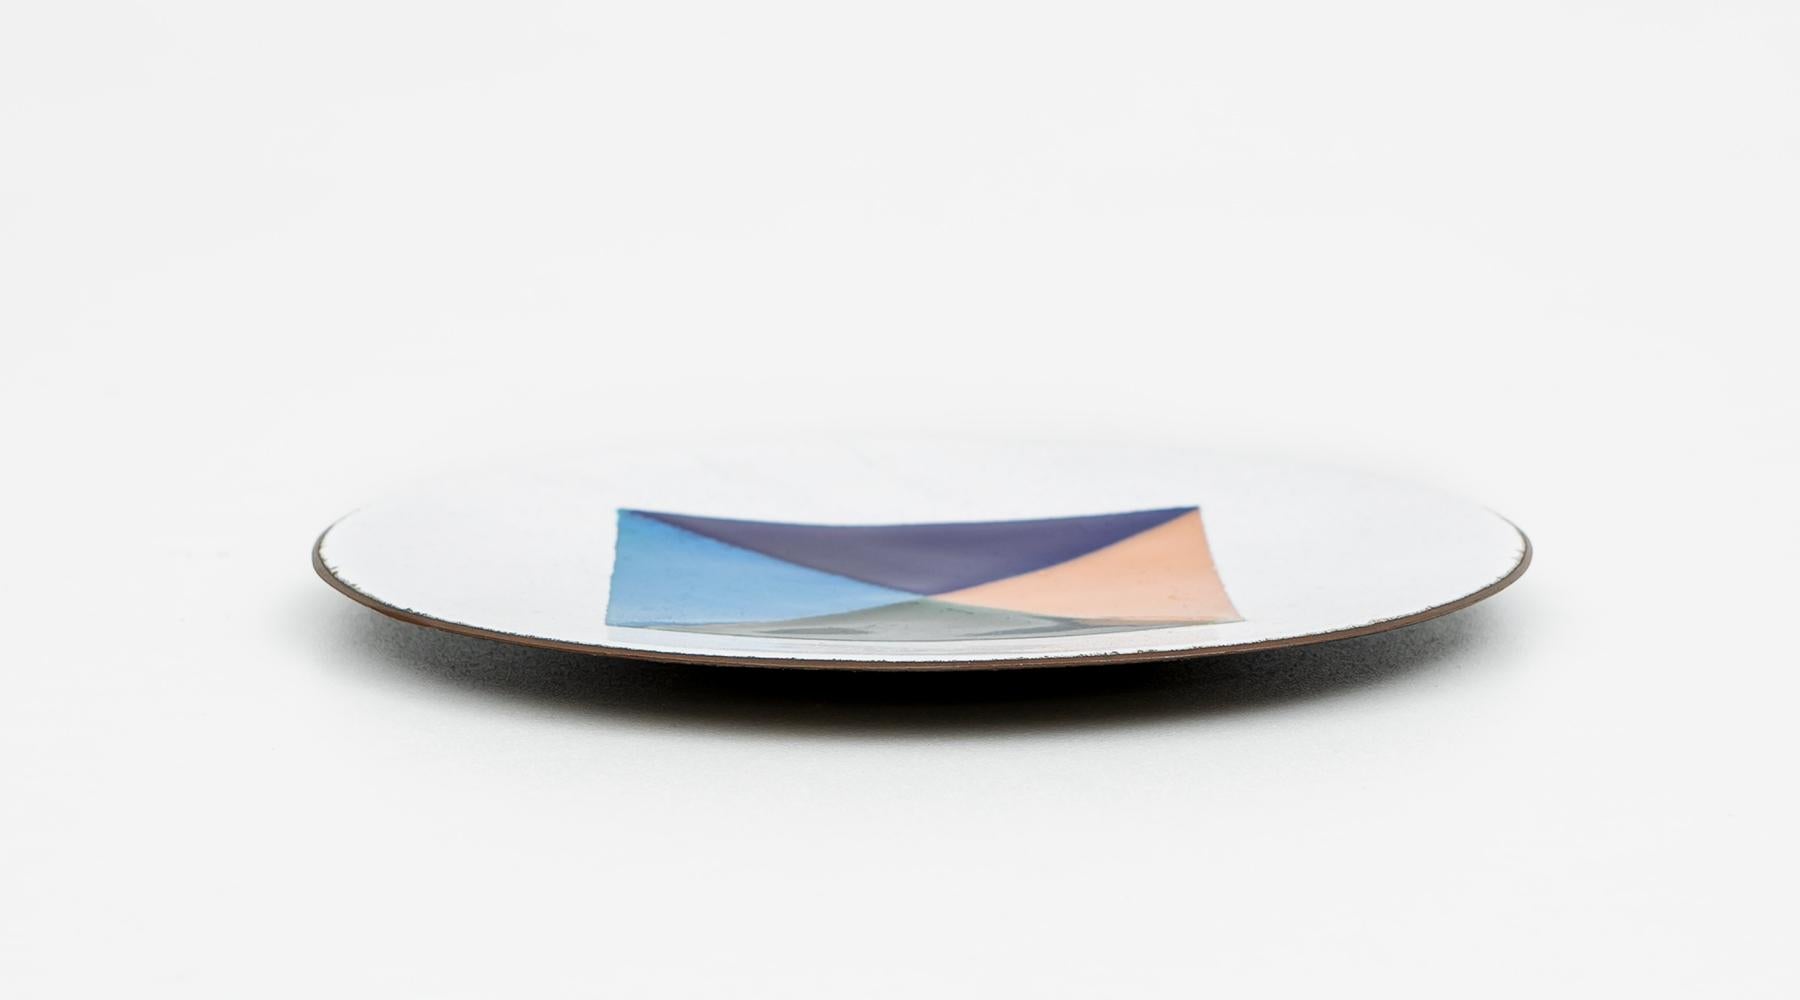 Dish in enameled copper, Ettore Sottsass, Italy, 1957.

Beautiful and charming Ettore Sottsass dish in enameled copper from 1958. Ettore Sottsass was an Italian architect and designer of the late 20th century. His body of designs included